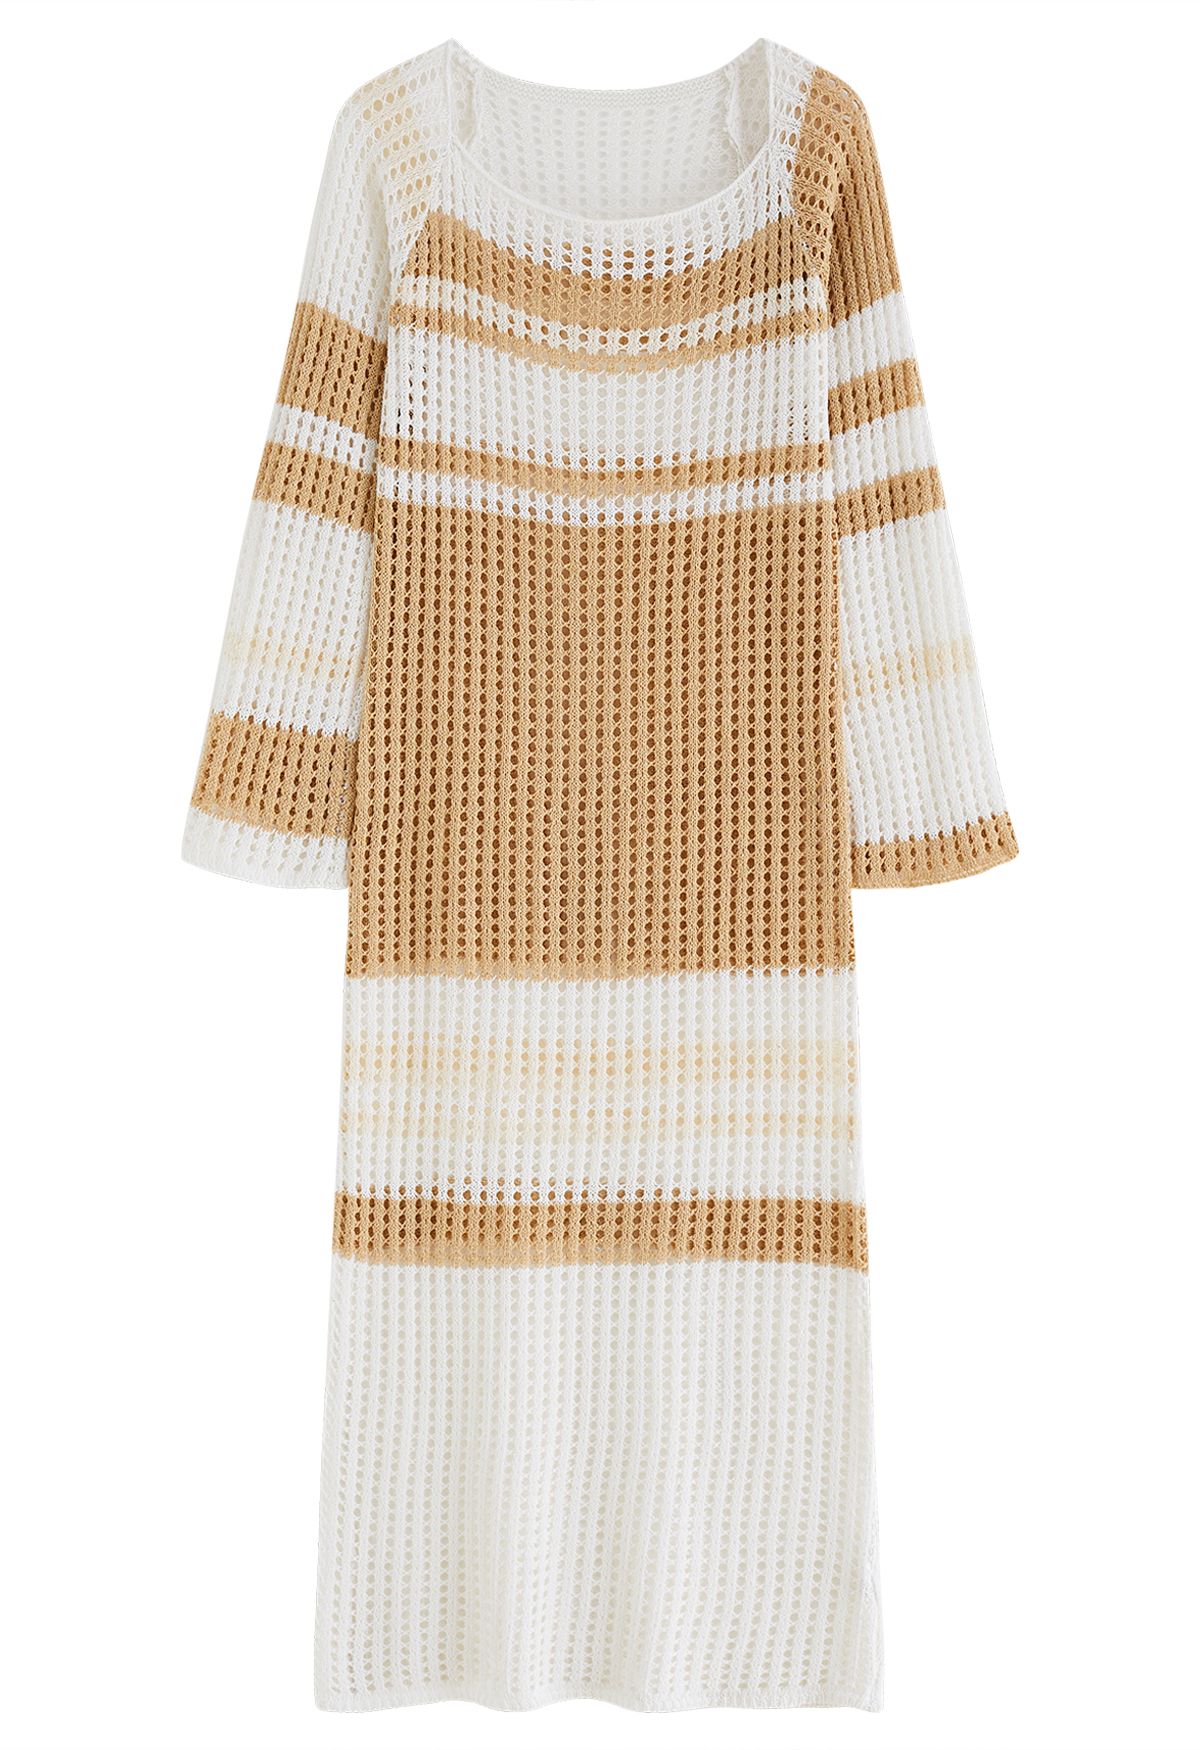 Light Tan Striped Hollow Out Knit Cover Up